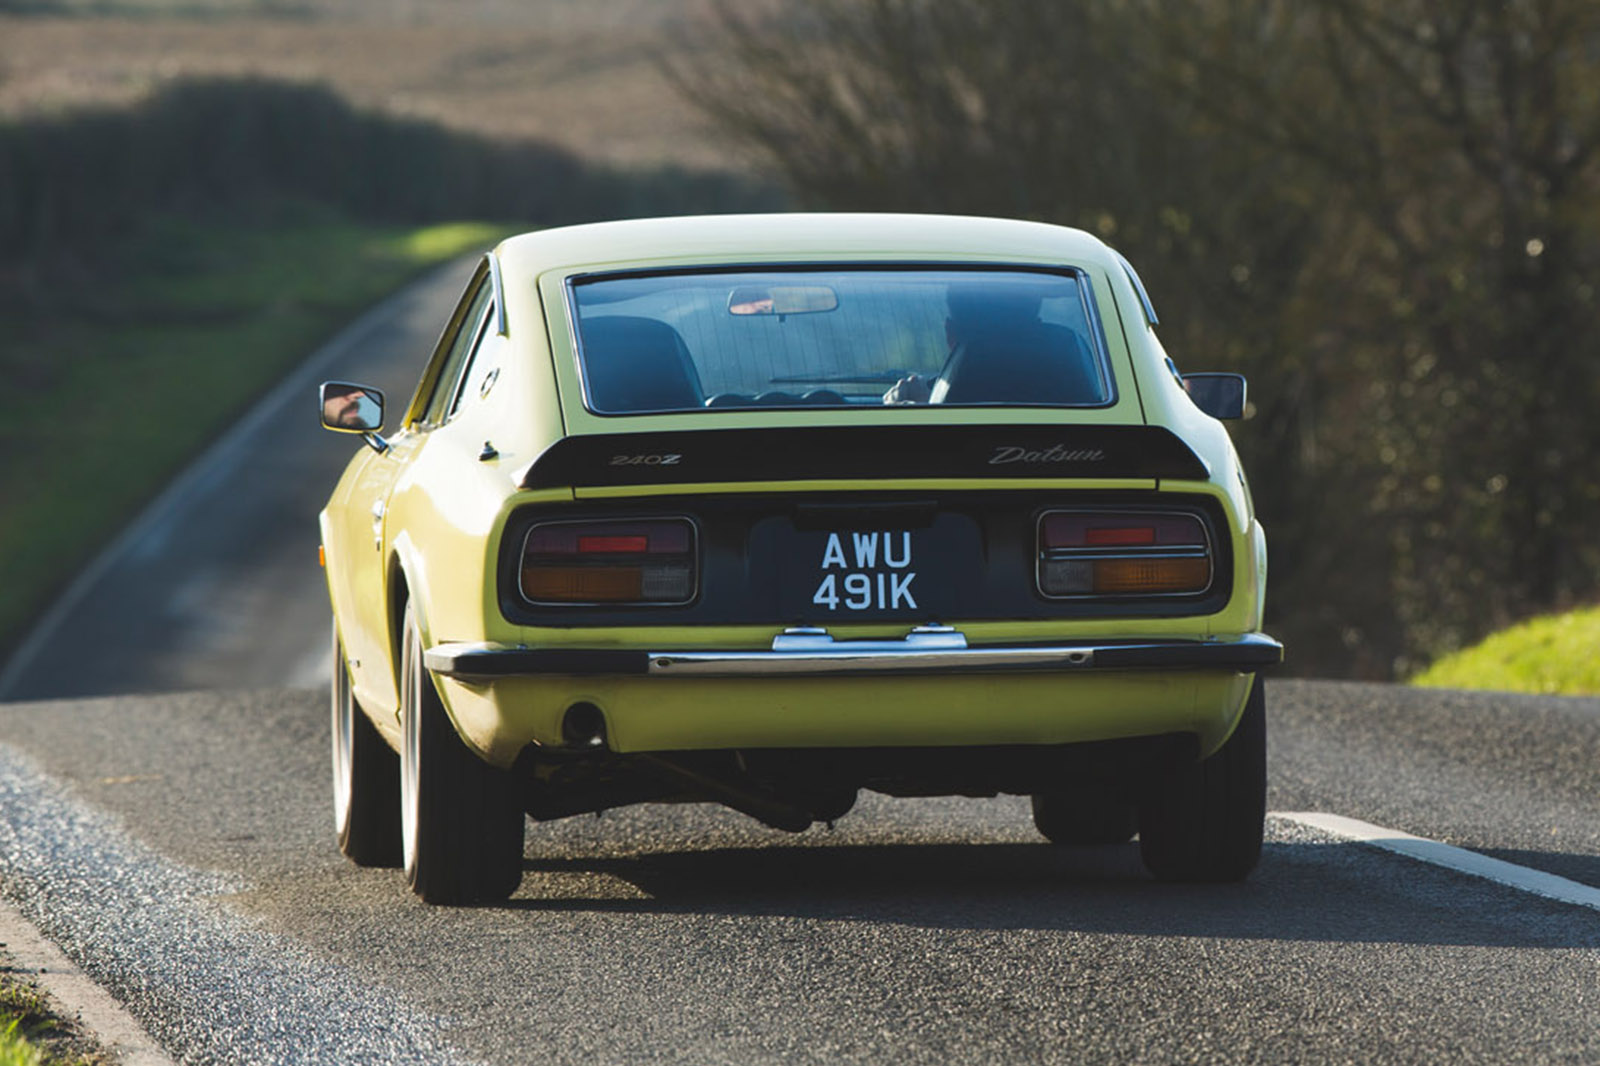 Used car buying guide: Datsun 240Z | Autocar